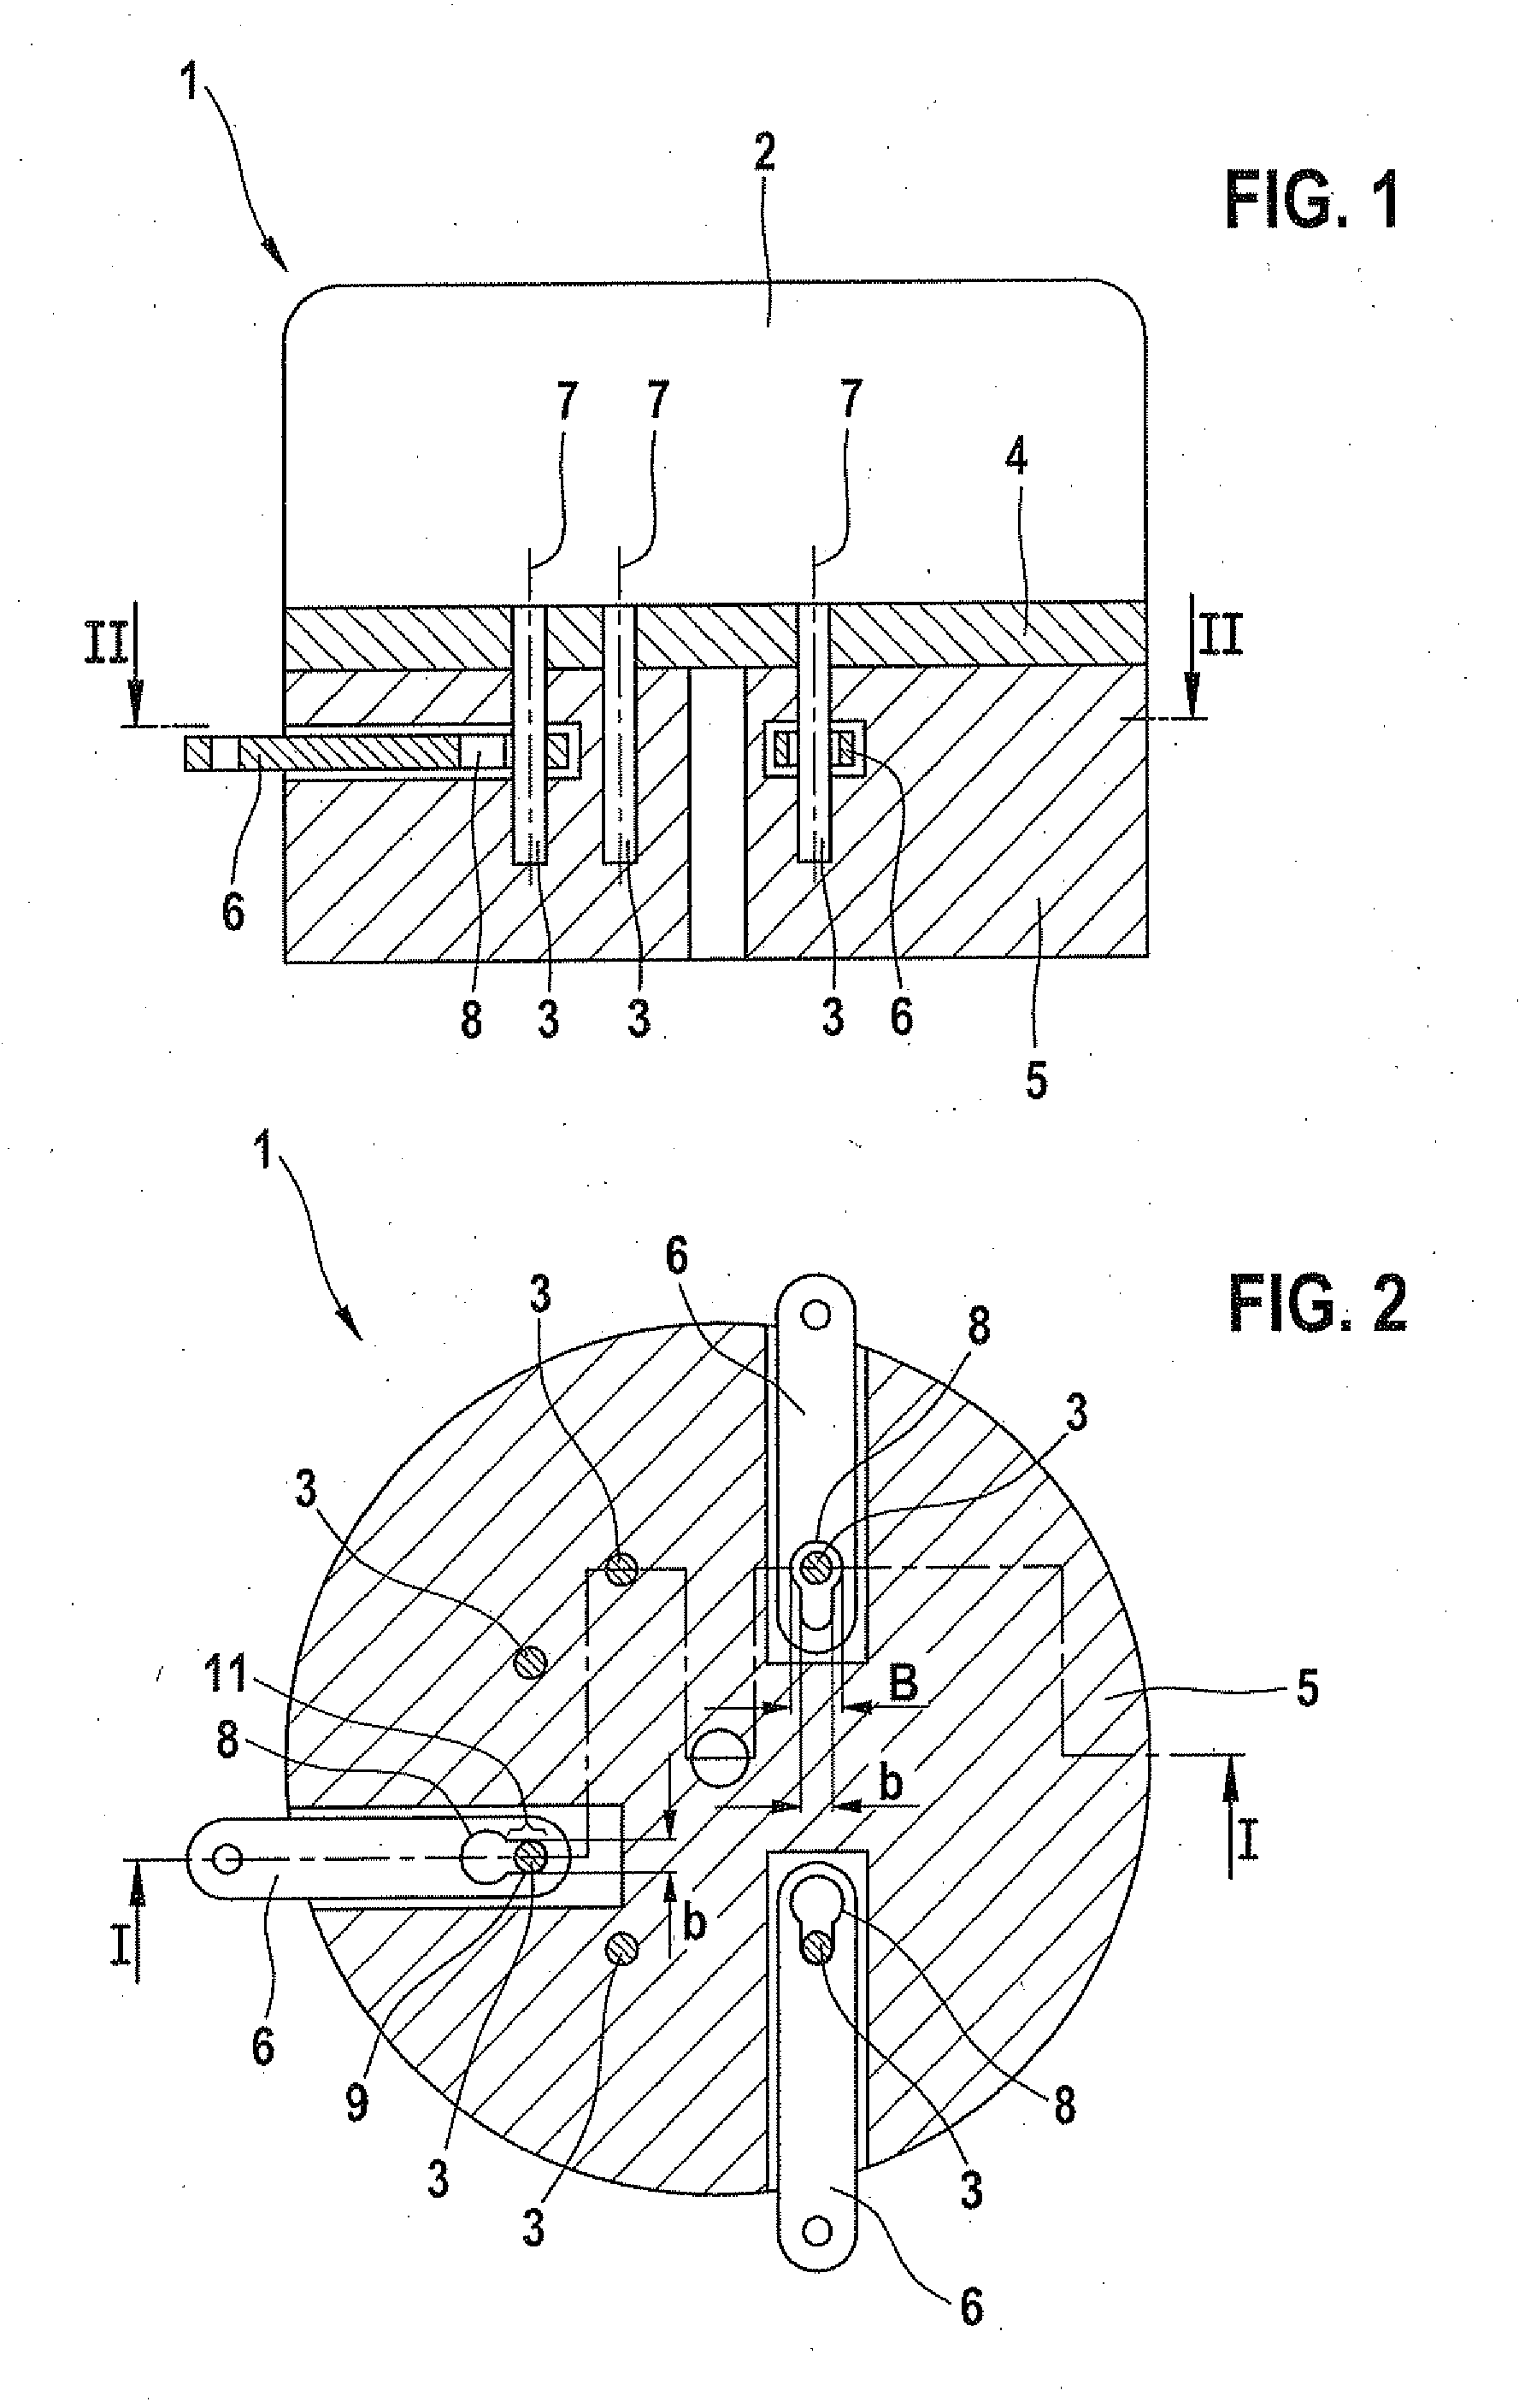 Electrical apparatus with a contacting device